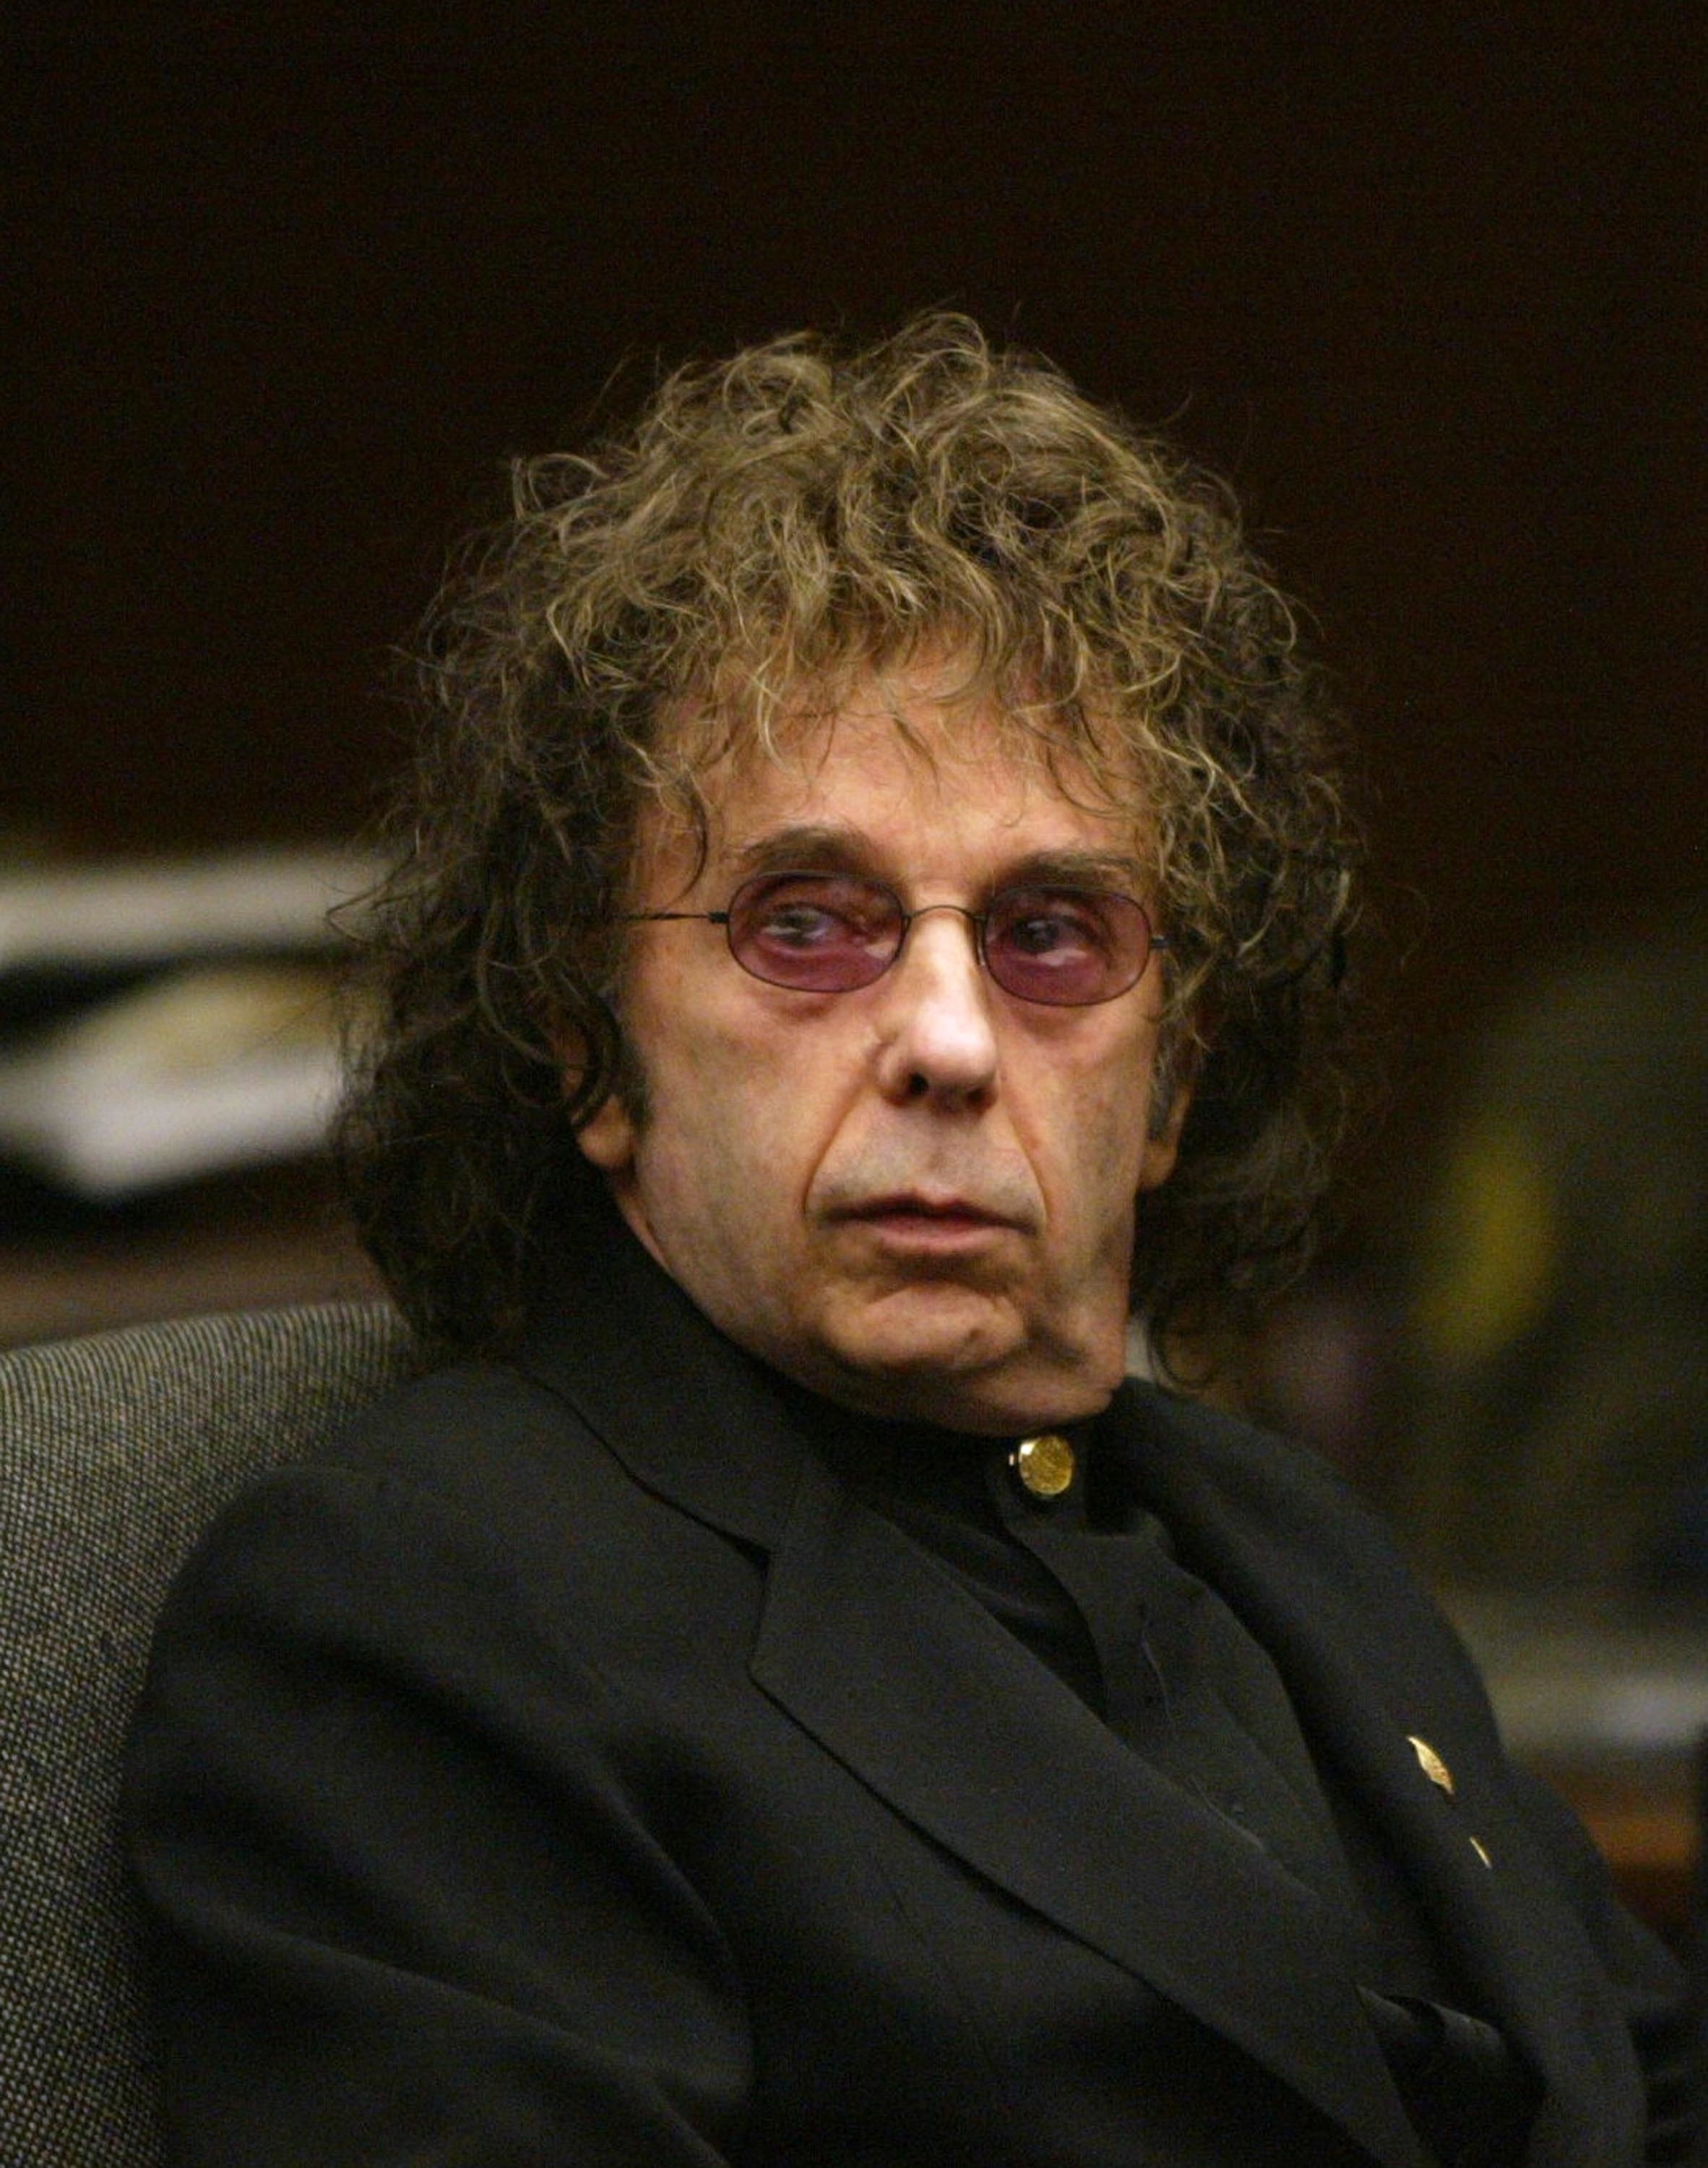 A photo of Phil Spector in court